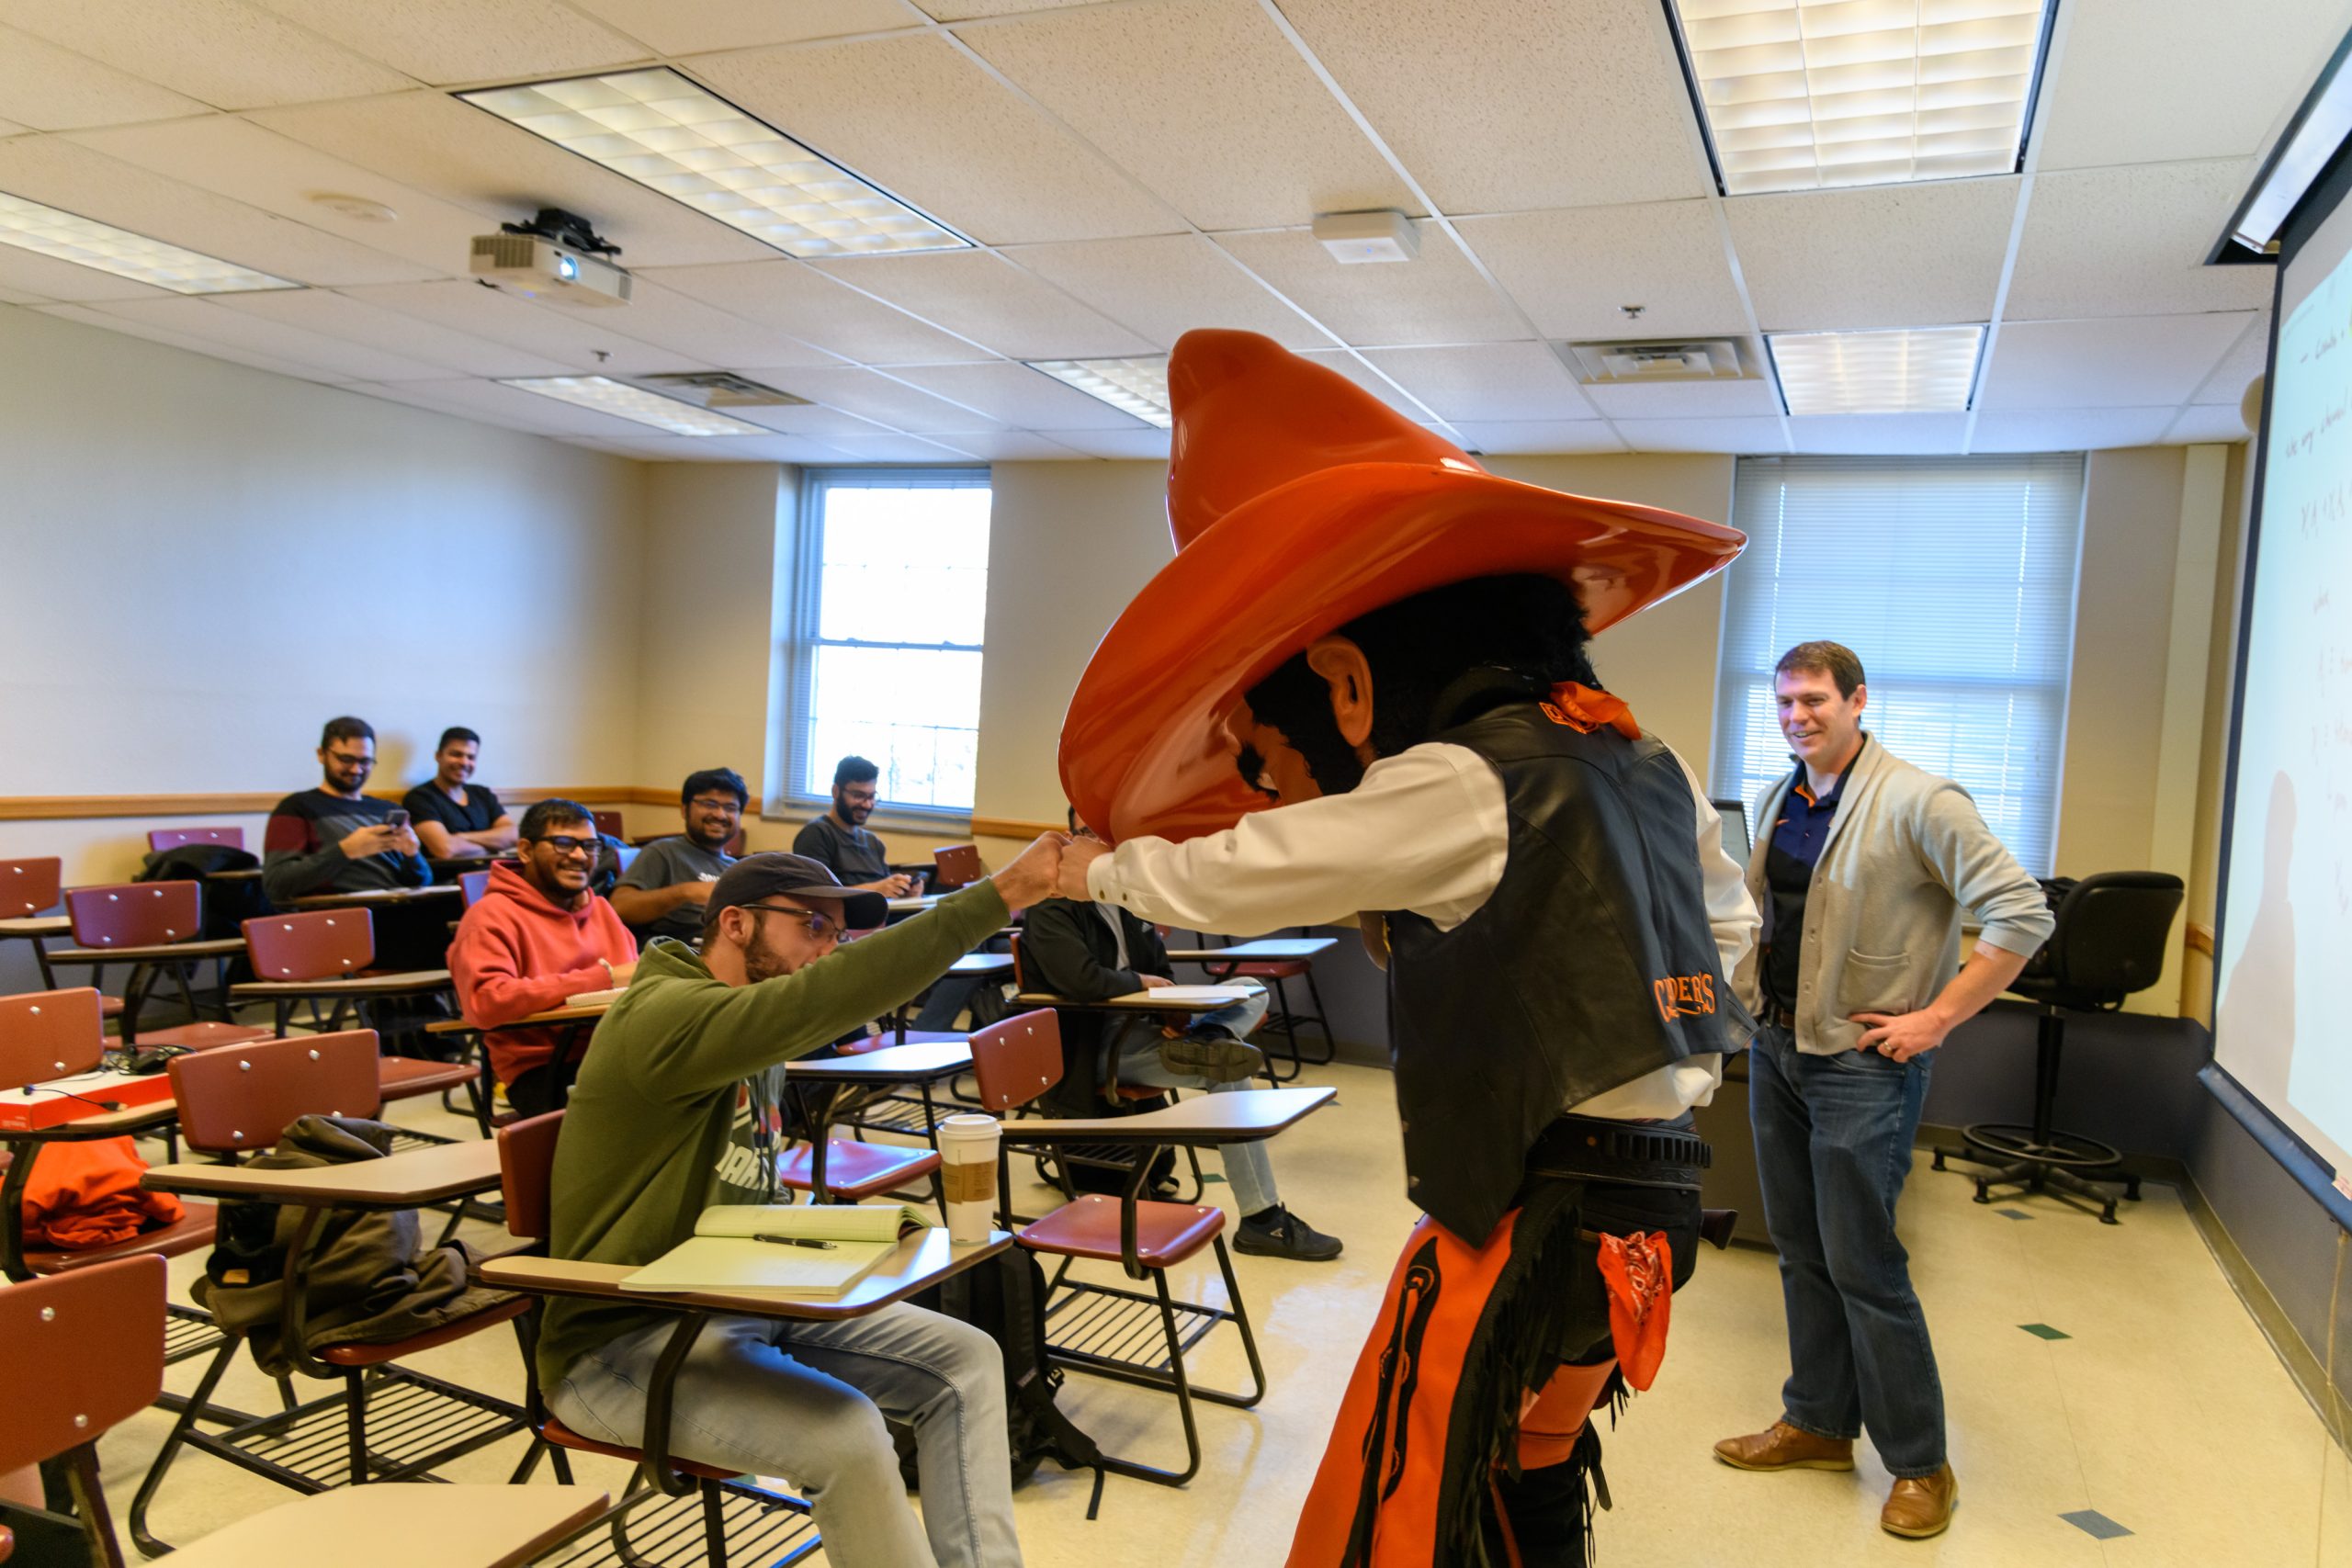 Pistol Pete fist bumping a student in the classroom